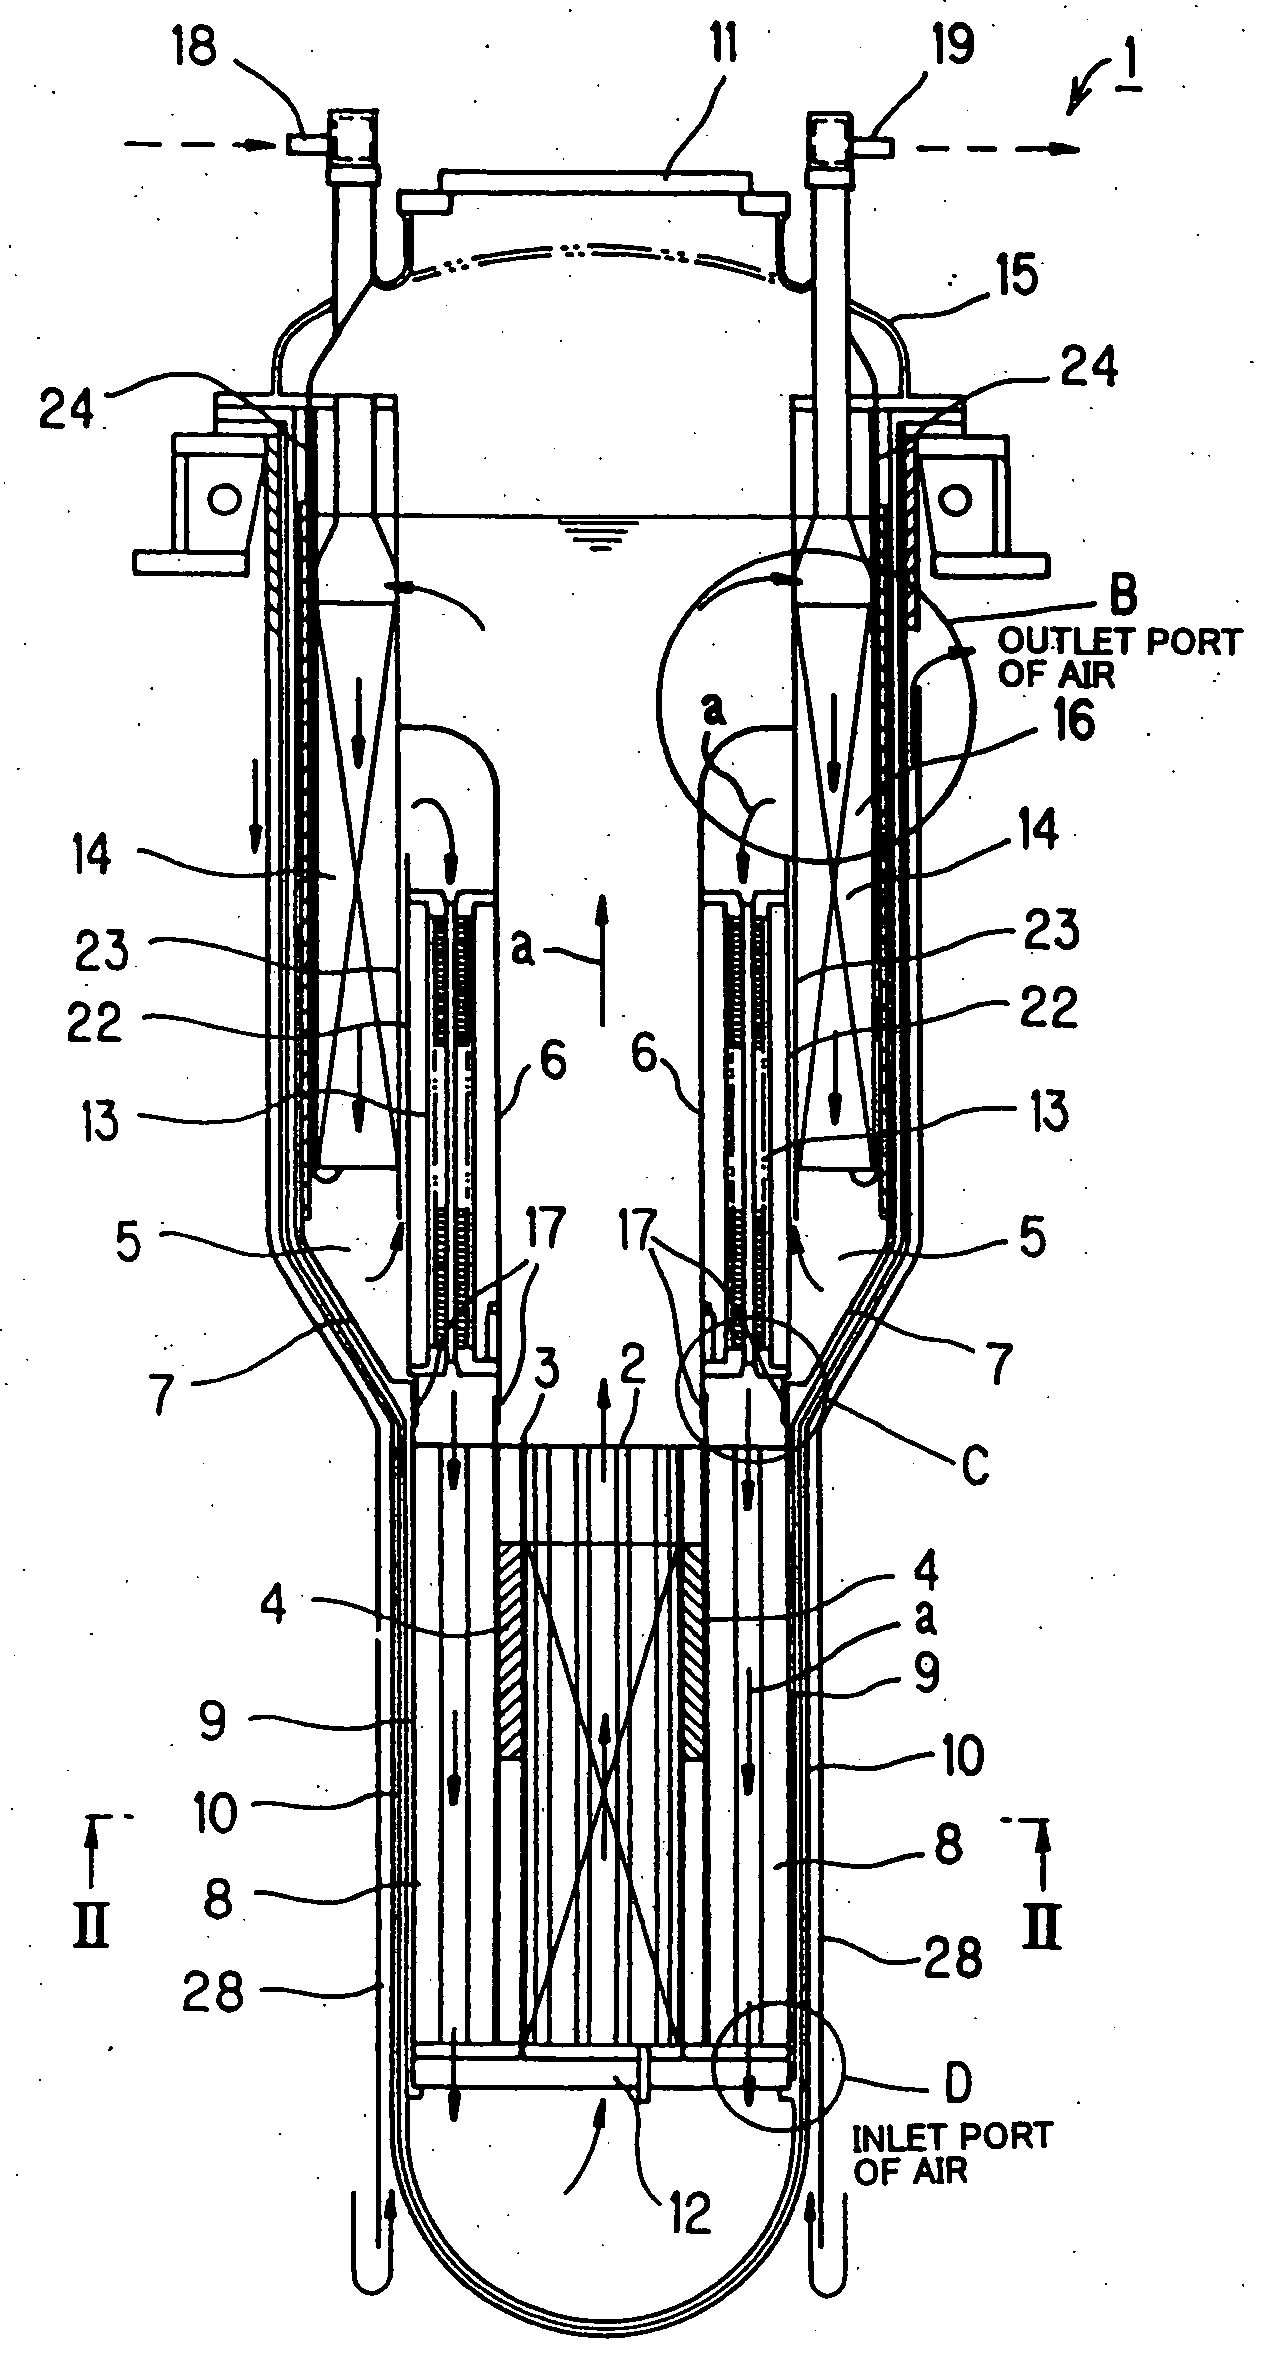 Reactivity control rod for core, core of nuclear reactor, nuclear reactor and nuclear power plant